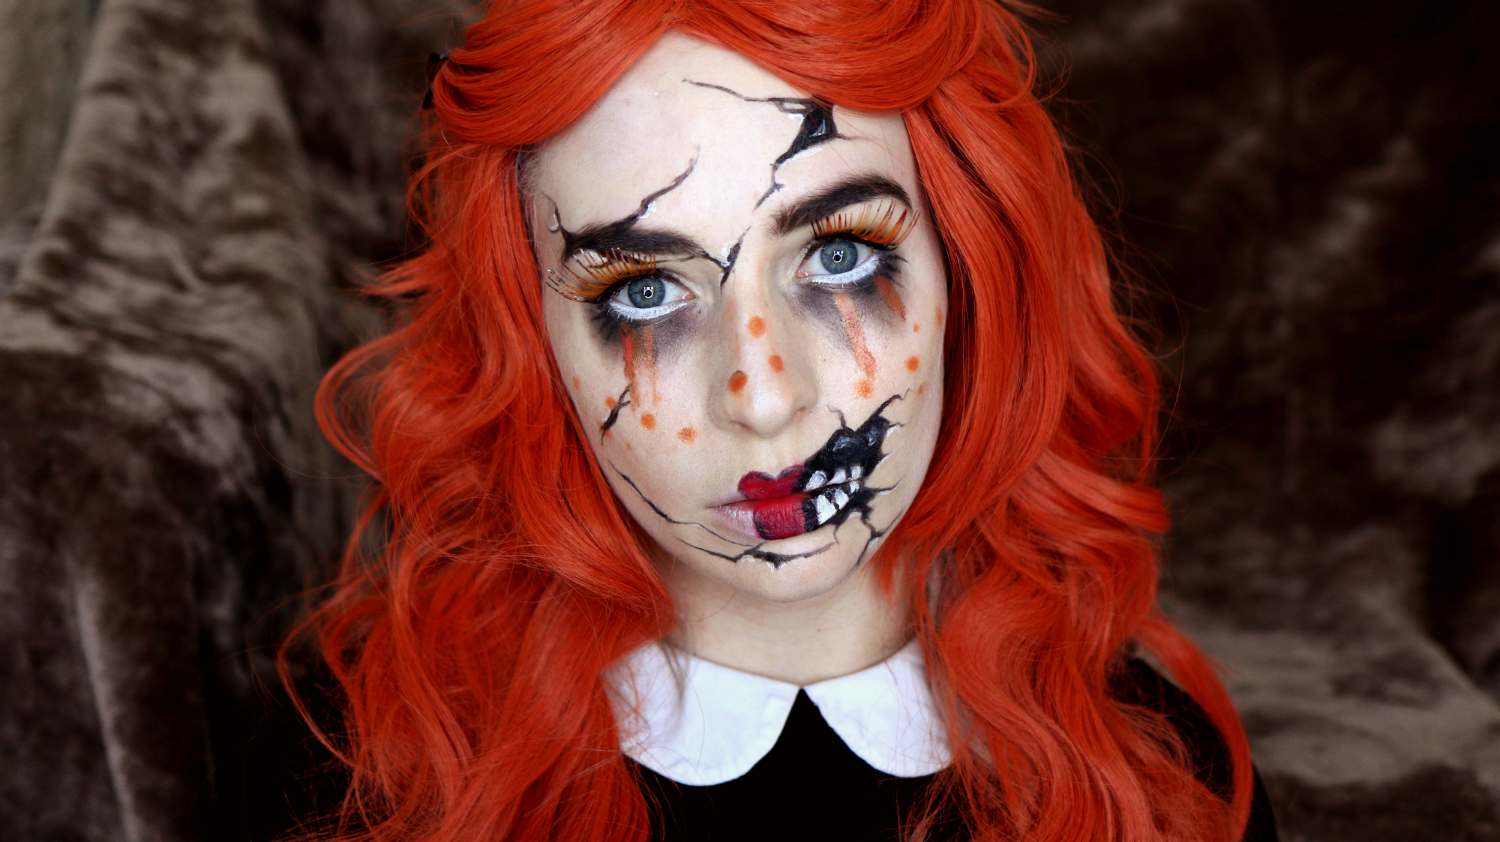 12 Best Halloween Doll Makeup Ideas and Tutorials for 2020